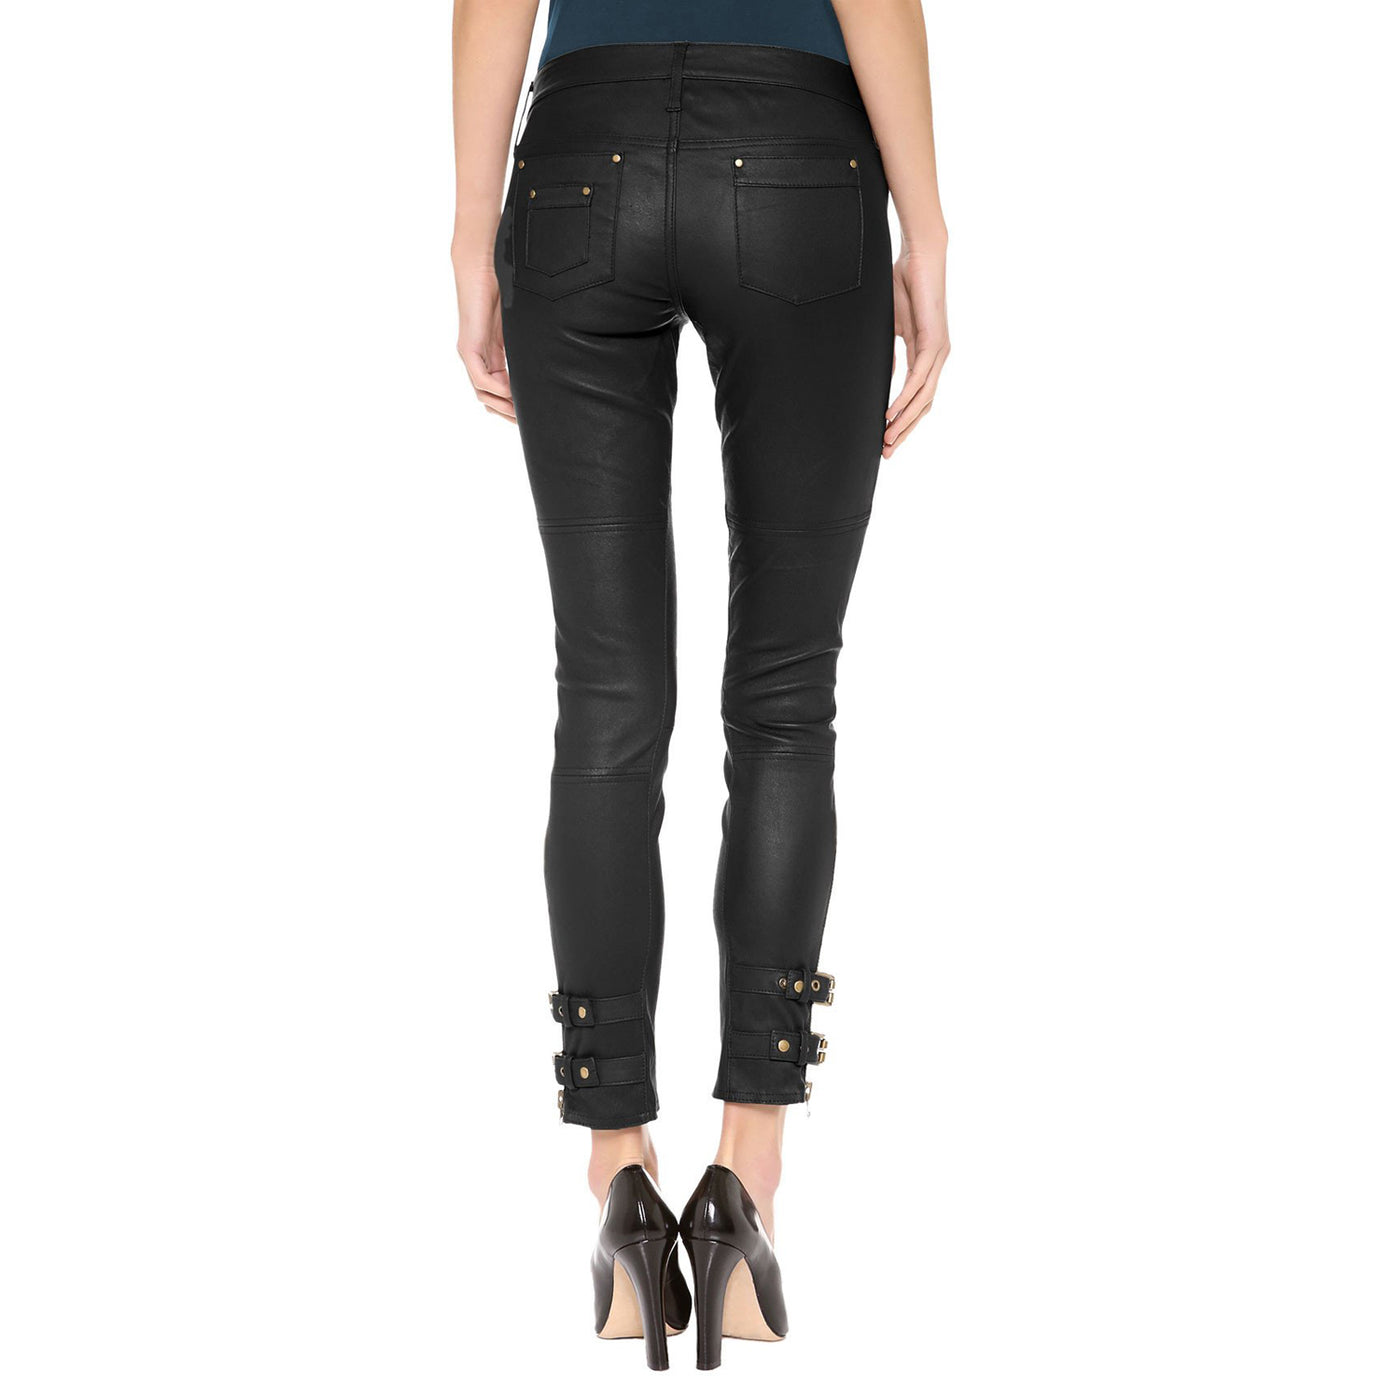 Leather pants (style #1) - Lusso Leather - 2